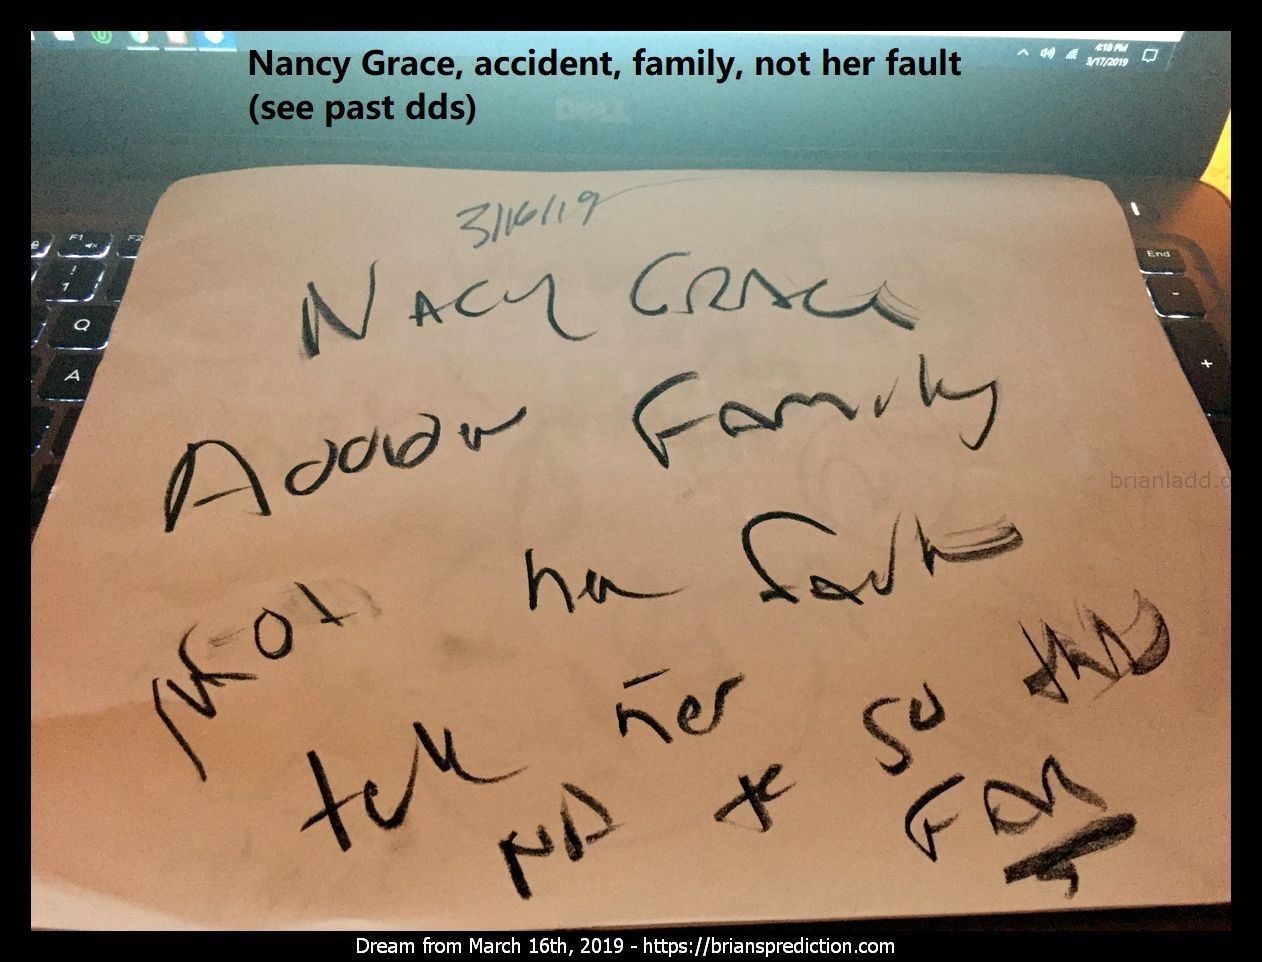 11786 16 March 2019 2 - Nancy Grace, Accident, Family, Not Her Fault (see Past Dds)  Dream Number 11786 16 March 2019 2 ...
Nancy Grace, Accident, Family, Not Her Fault (see Past Dds)  Dream Number 11786 16 March 2019 2 Psychic Prediction
